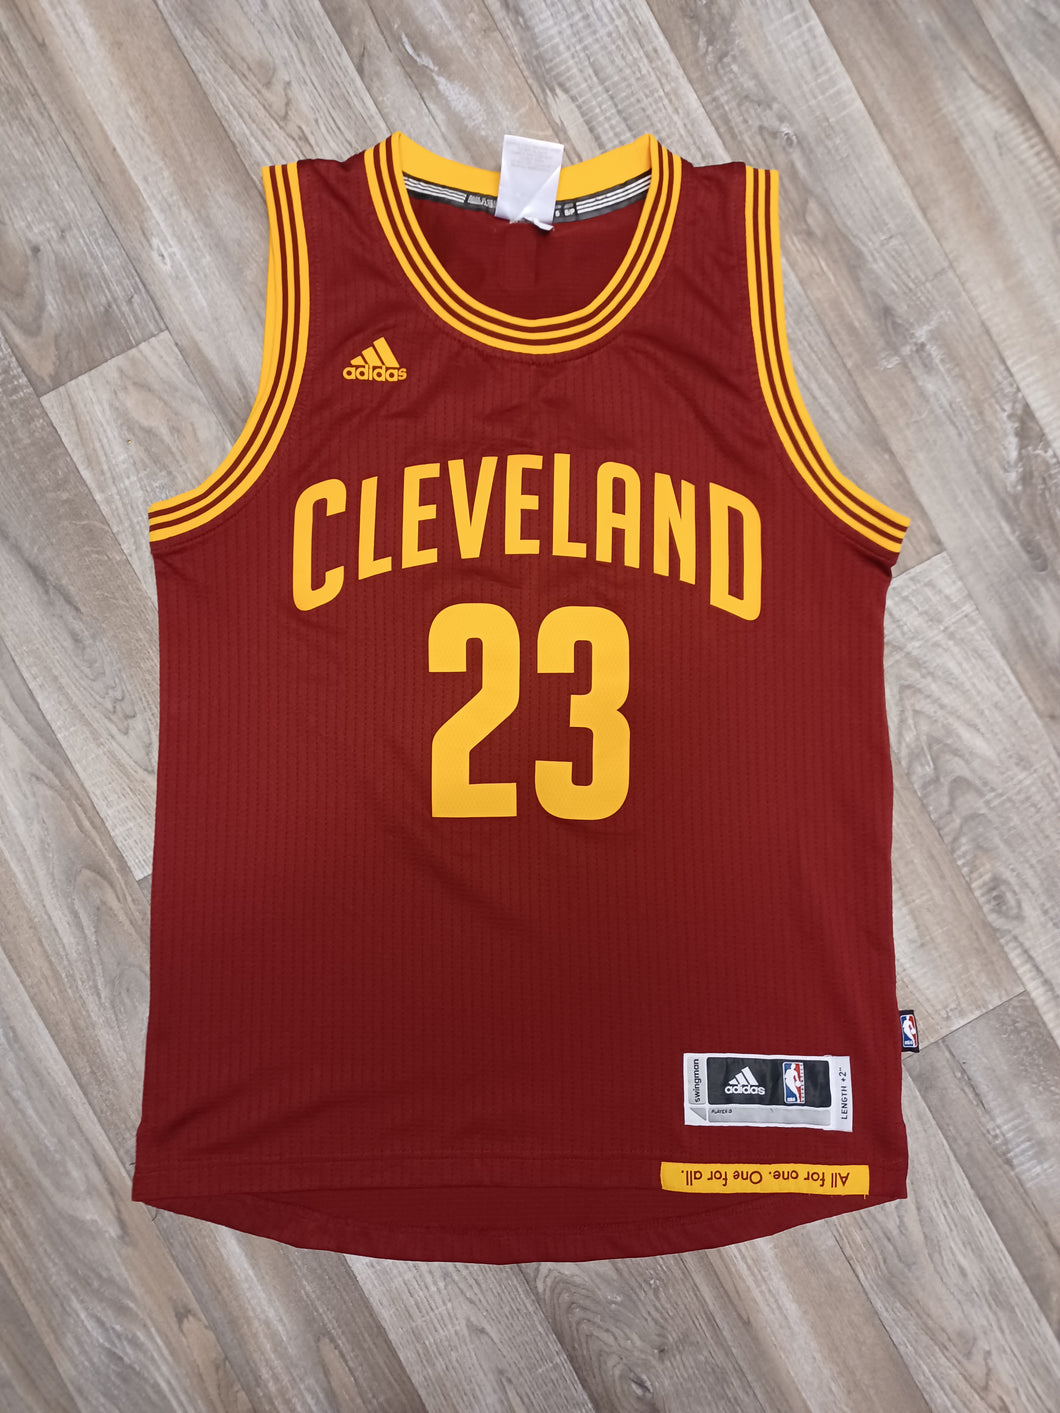 LeBron James Cleveland Cavaliers Jersey Size Small